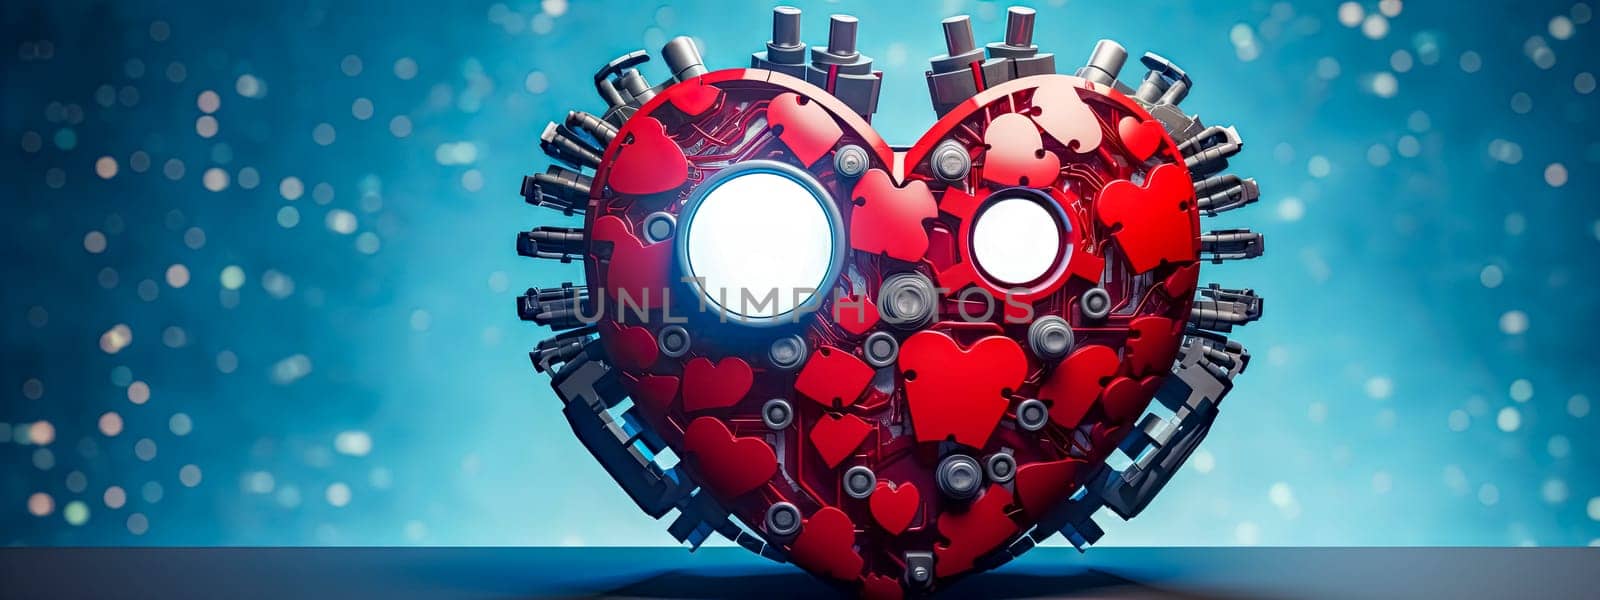 Robotic Heart Concept Art with Blue Bokeh Background by Edophoto